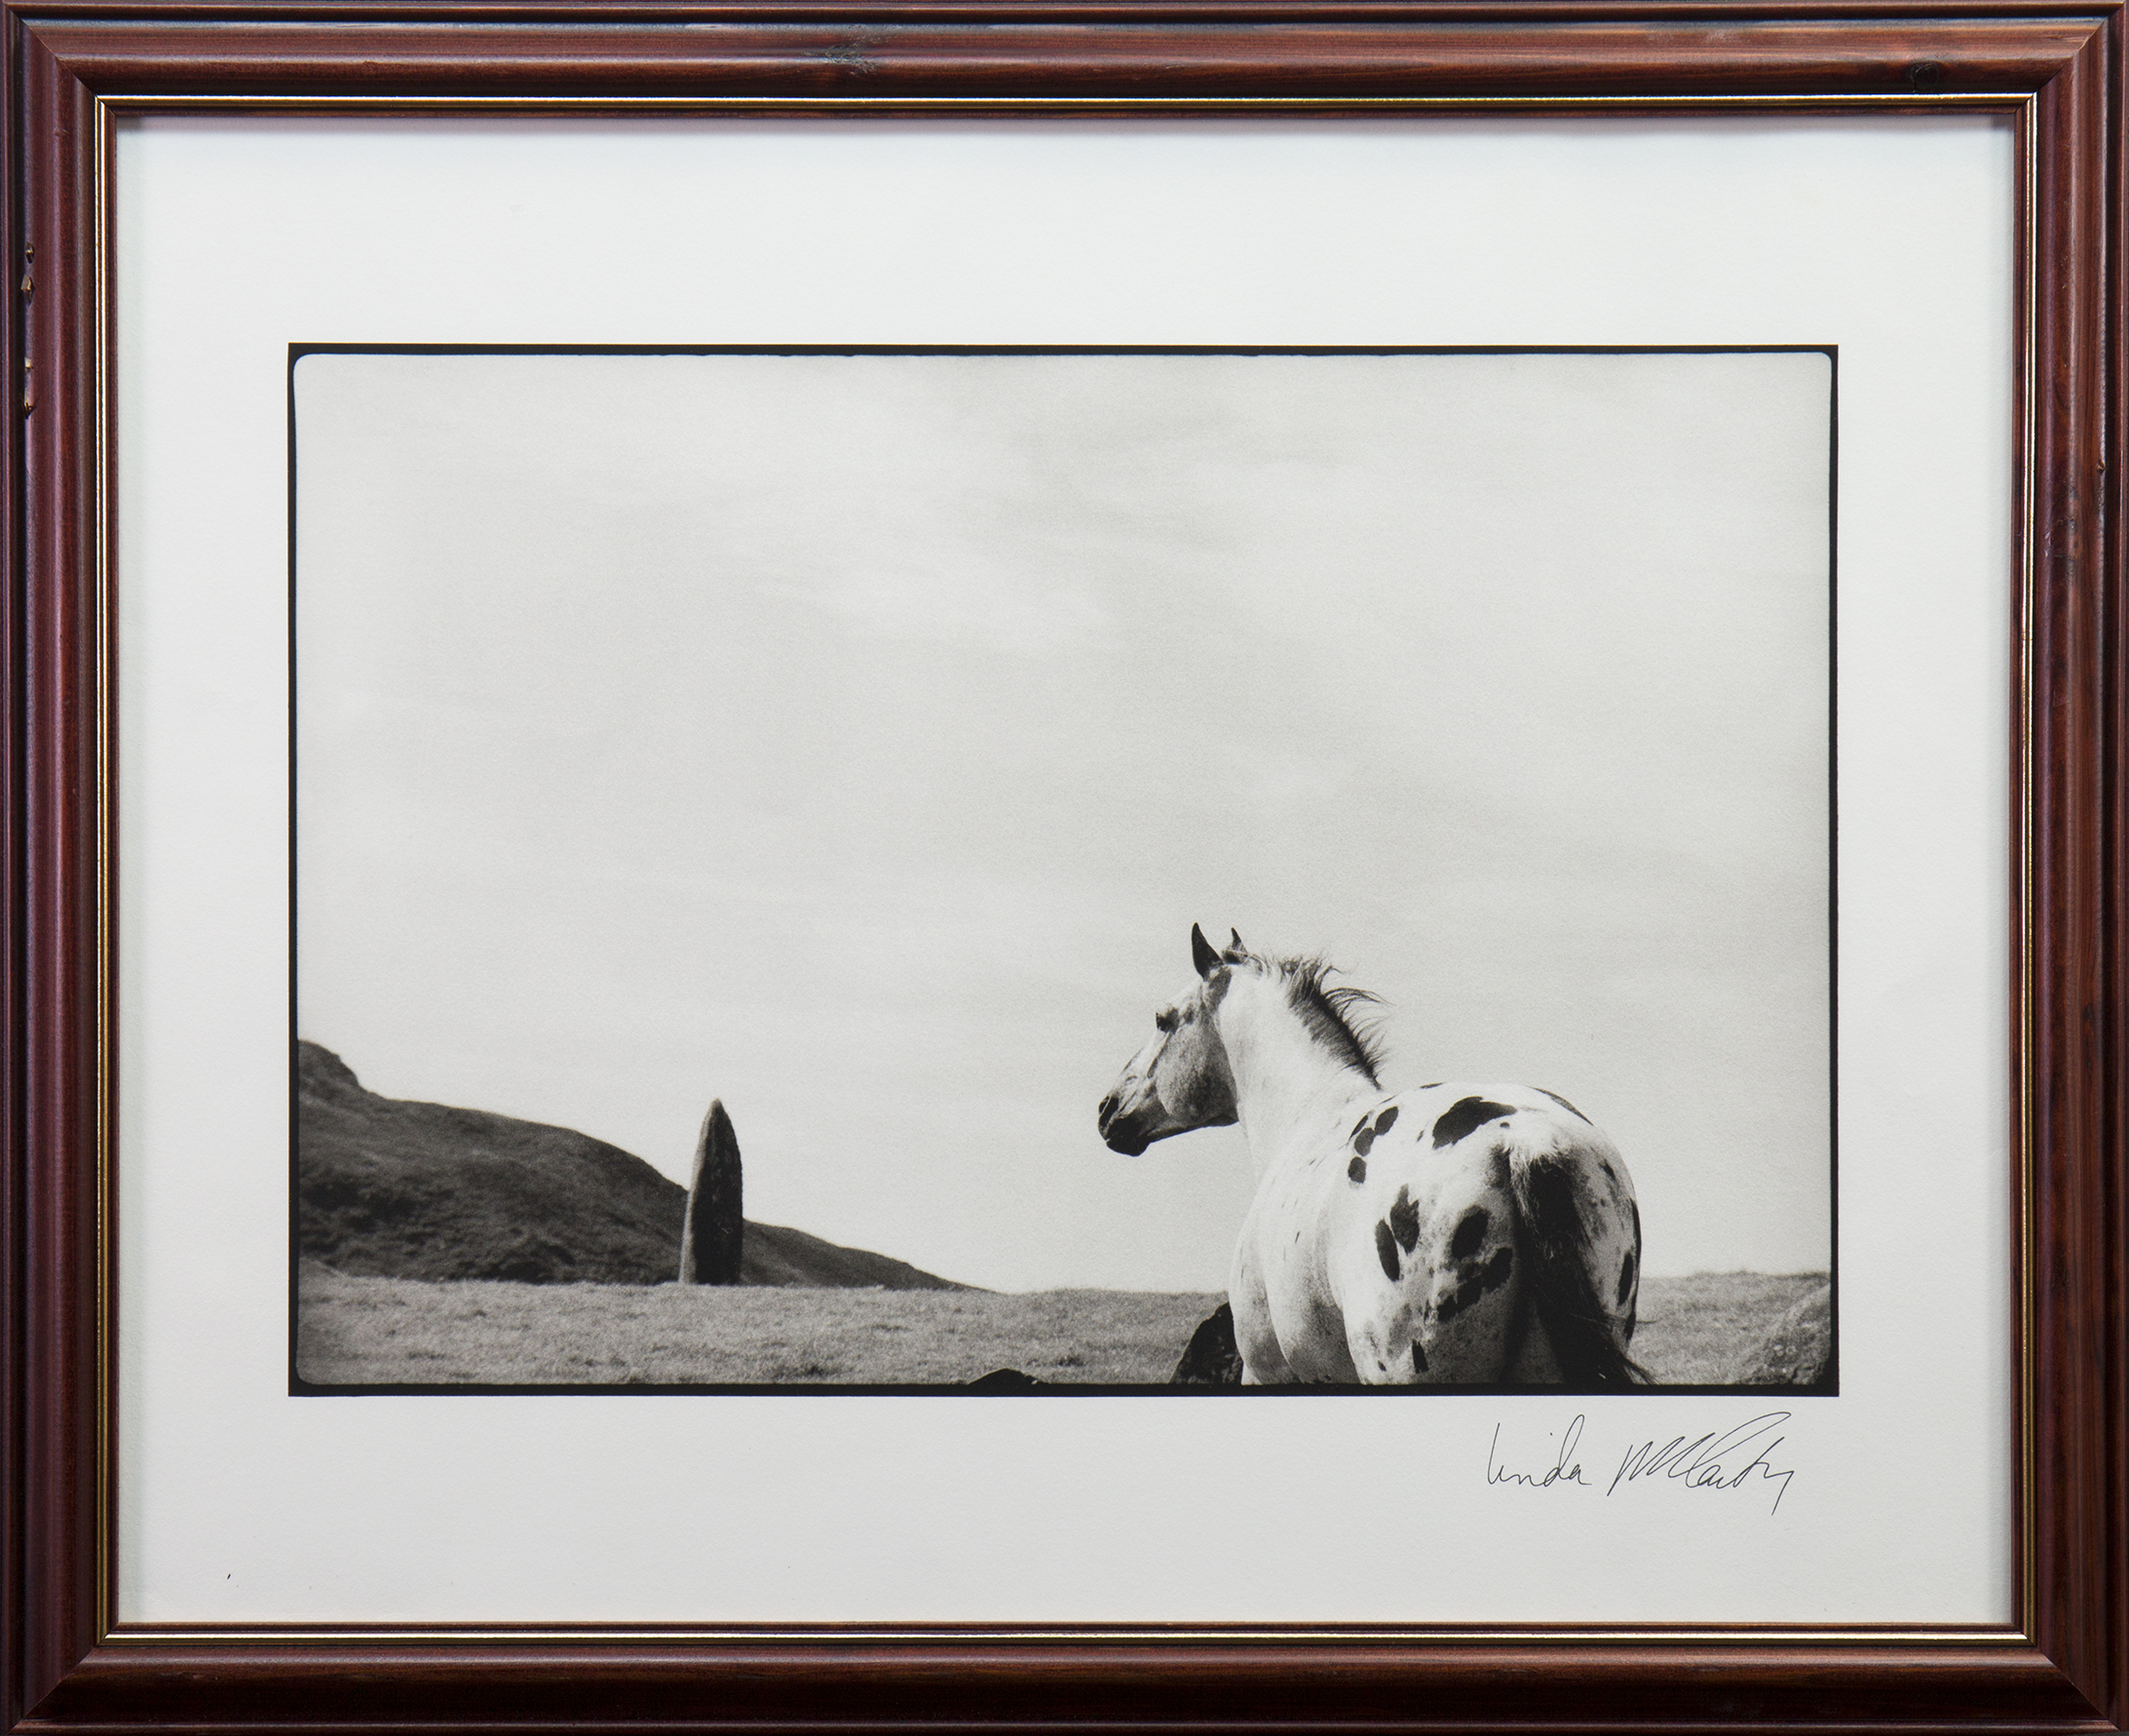 * LINDA MCCARTNEY (1941 - 1998), THE STALLION AND THE STANDING STONE giclee print, - Image 2 of 2